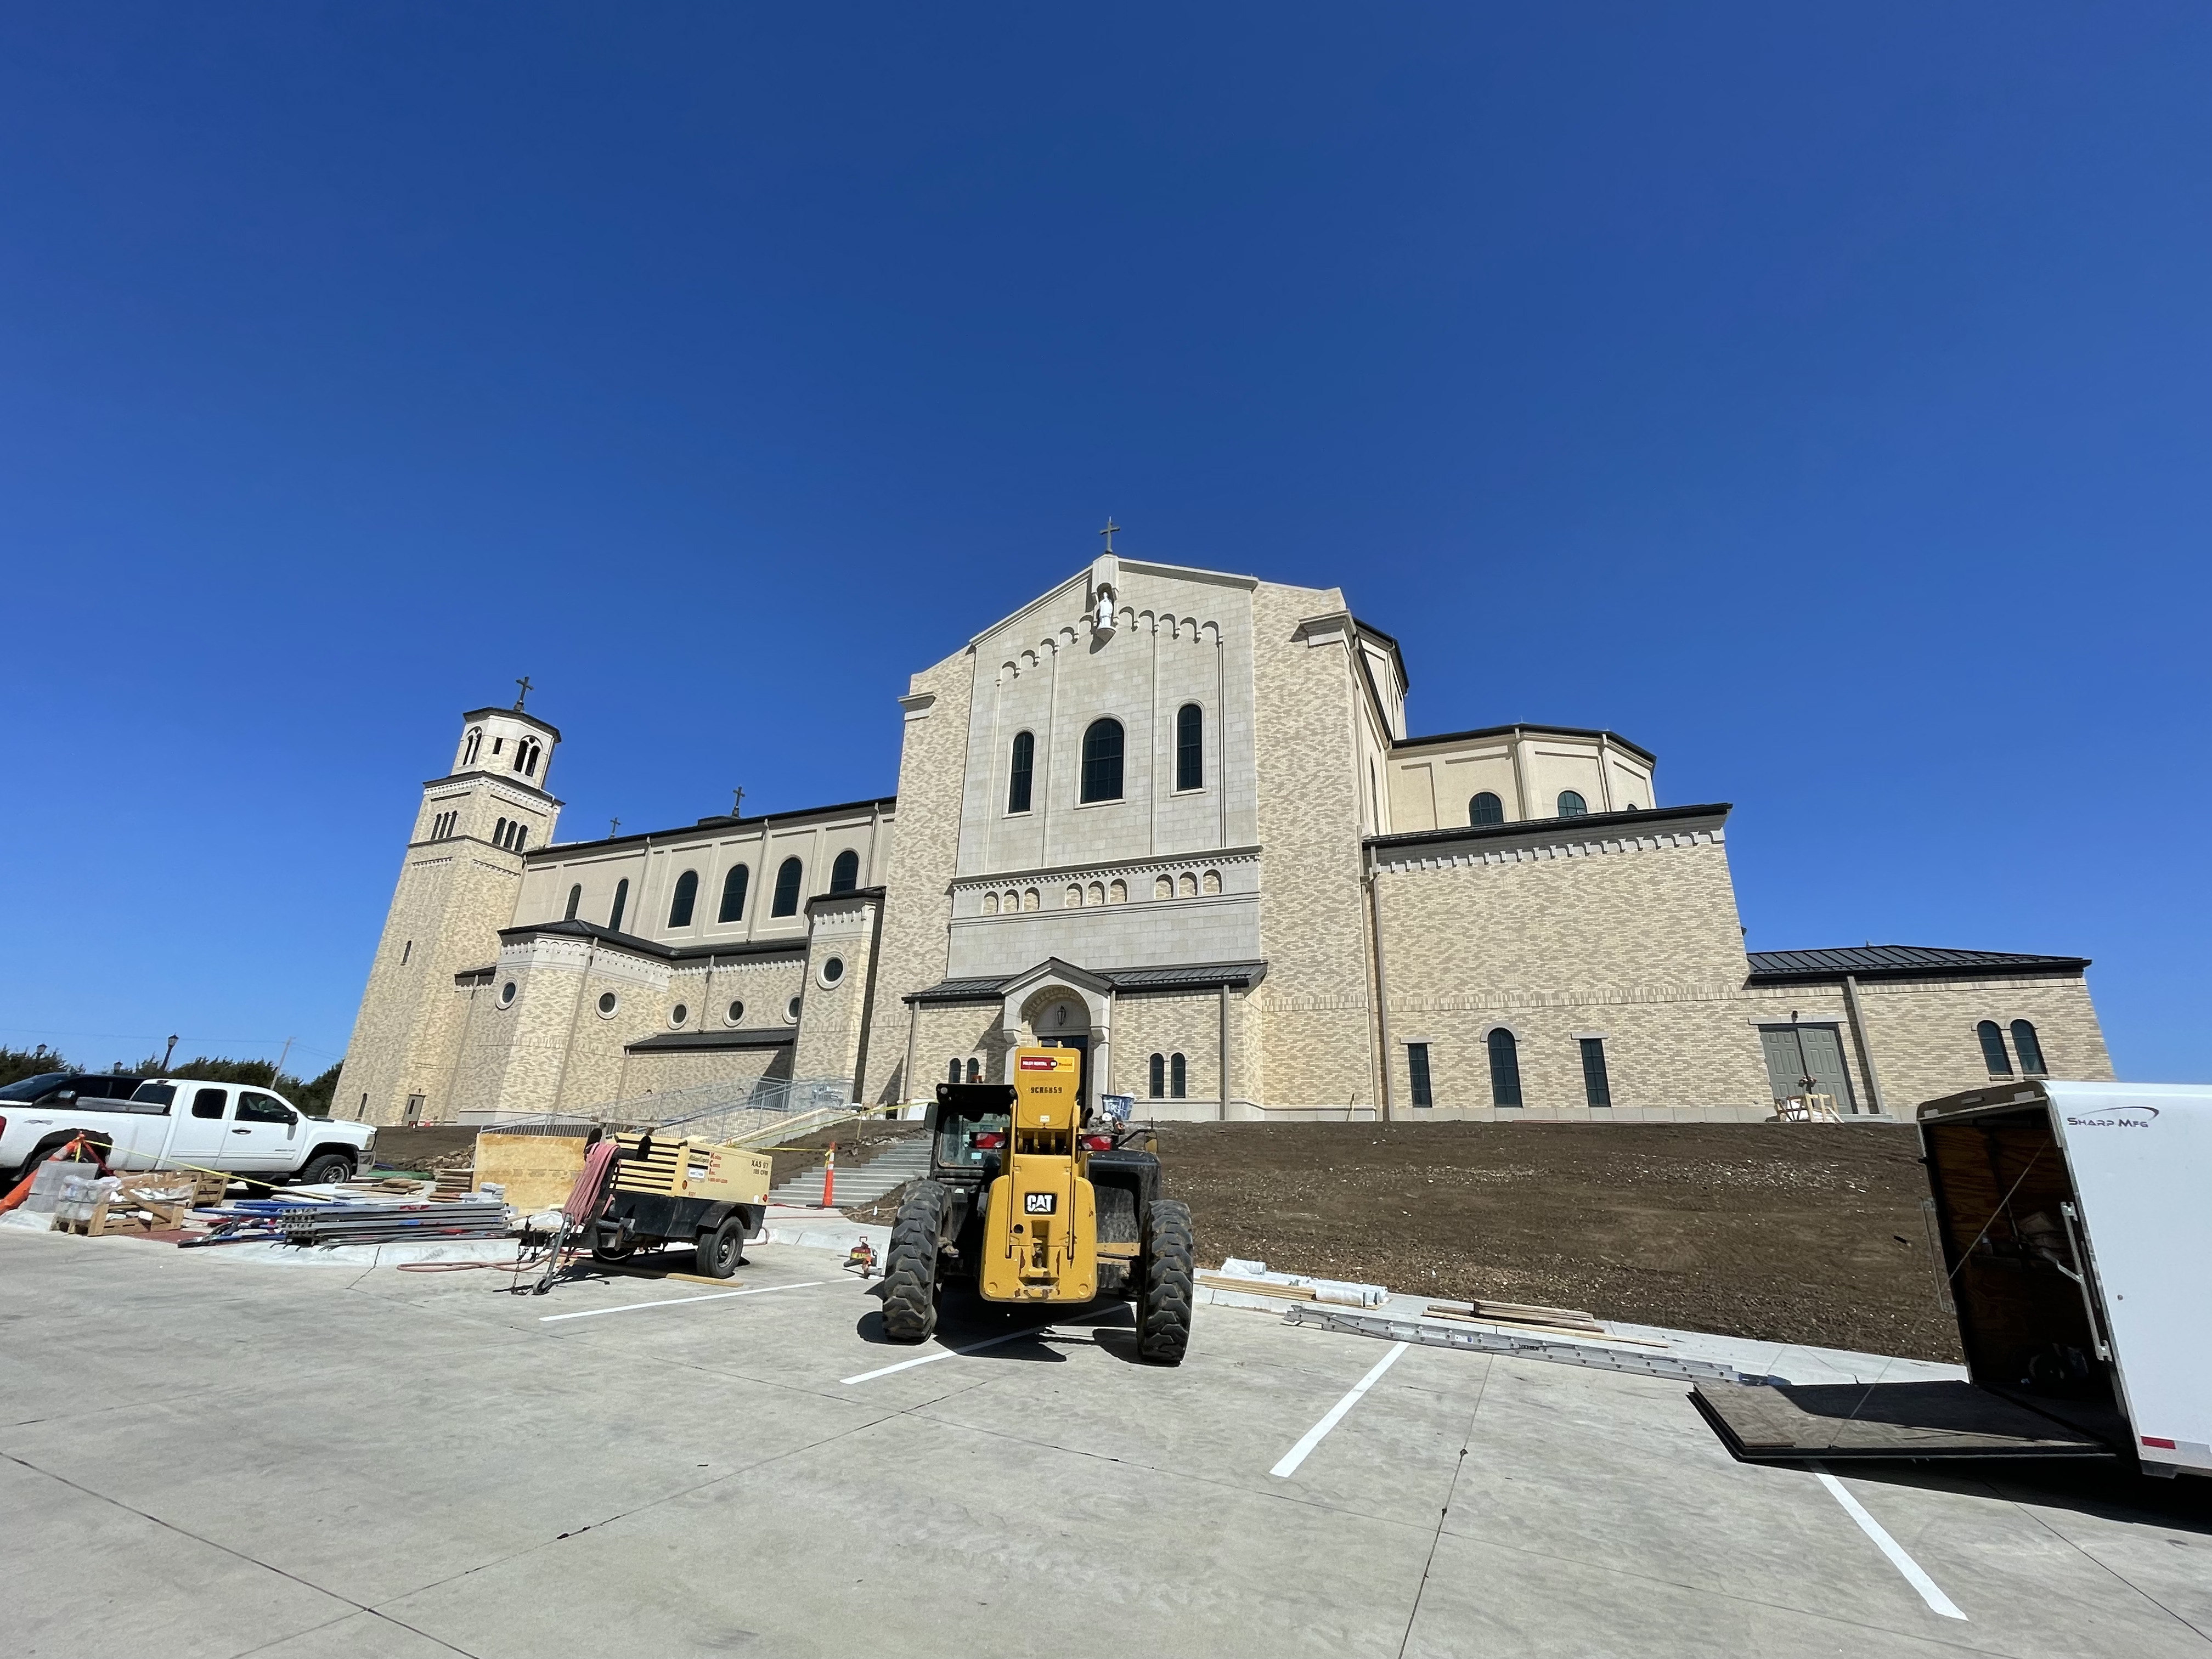 St. Marys, Kansas – THE IMMACULATA CHURCH: THE LARGEST SSPX-BUILT CHURCH IN THE WORLD